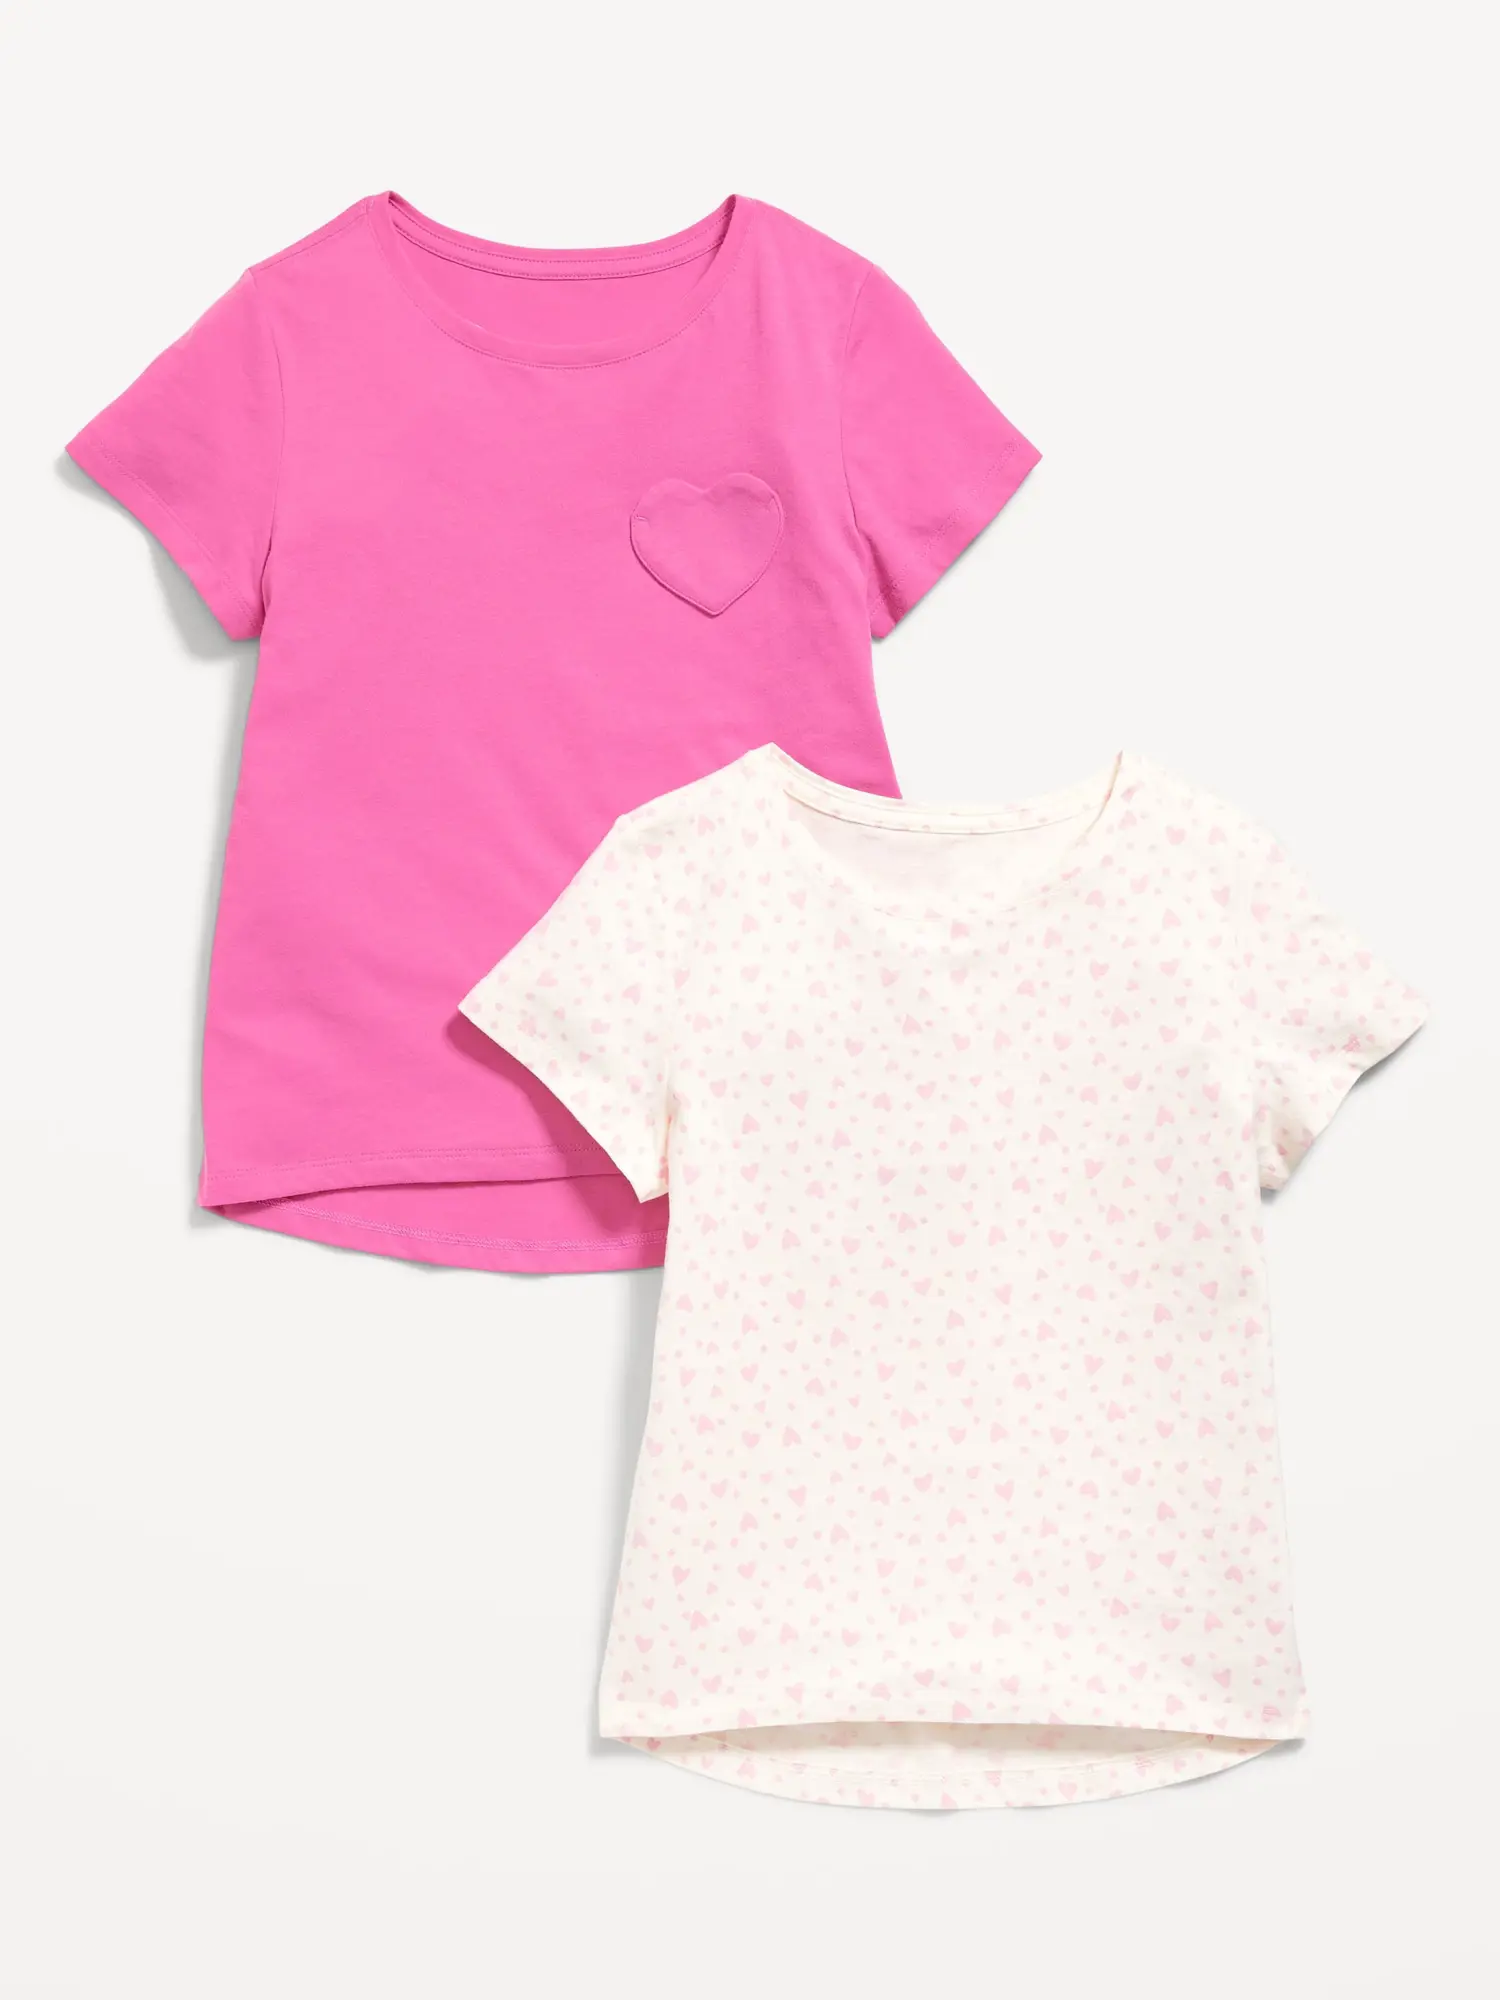 Old Navy Softest Short-Sleeve T-Shirt Variety 2-Pack for Girls pink. 1